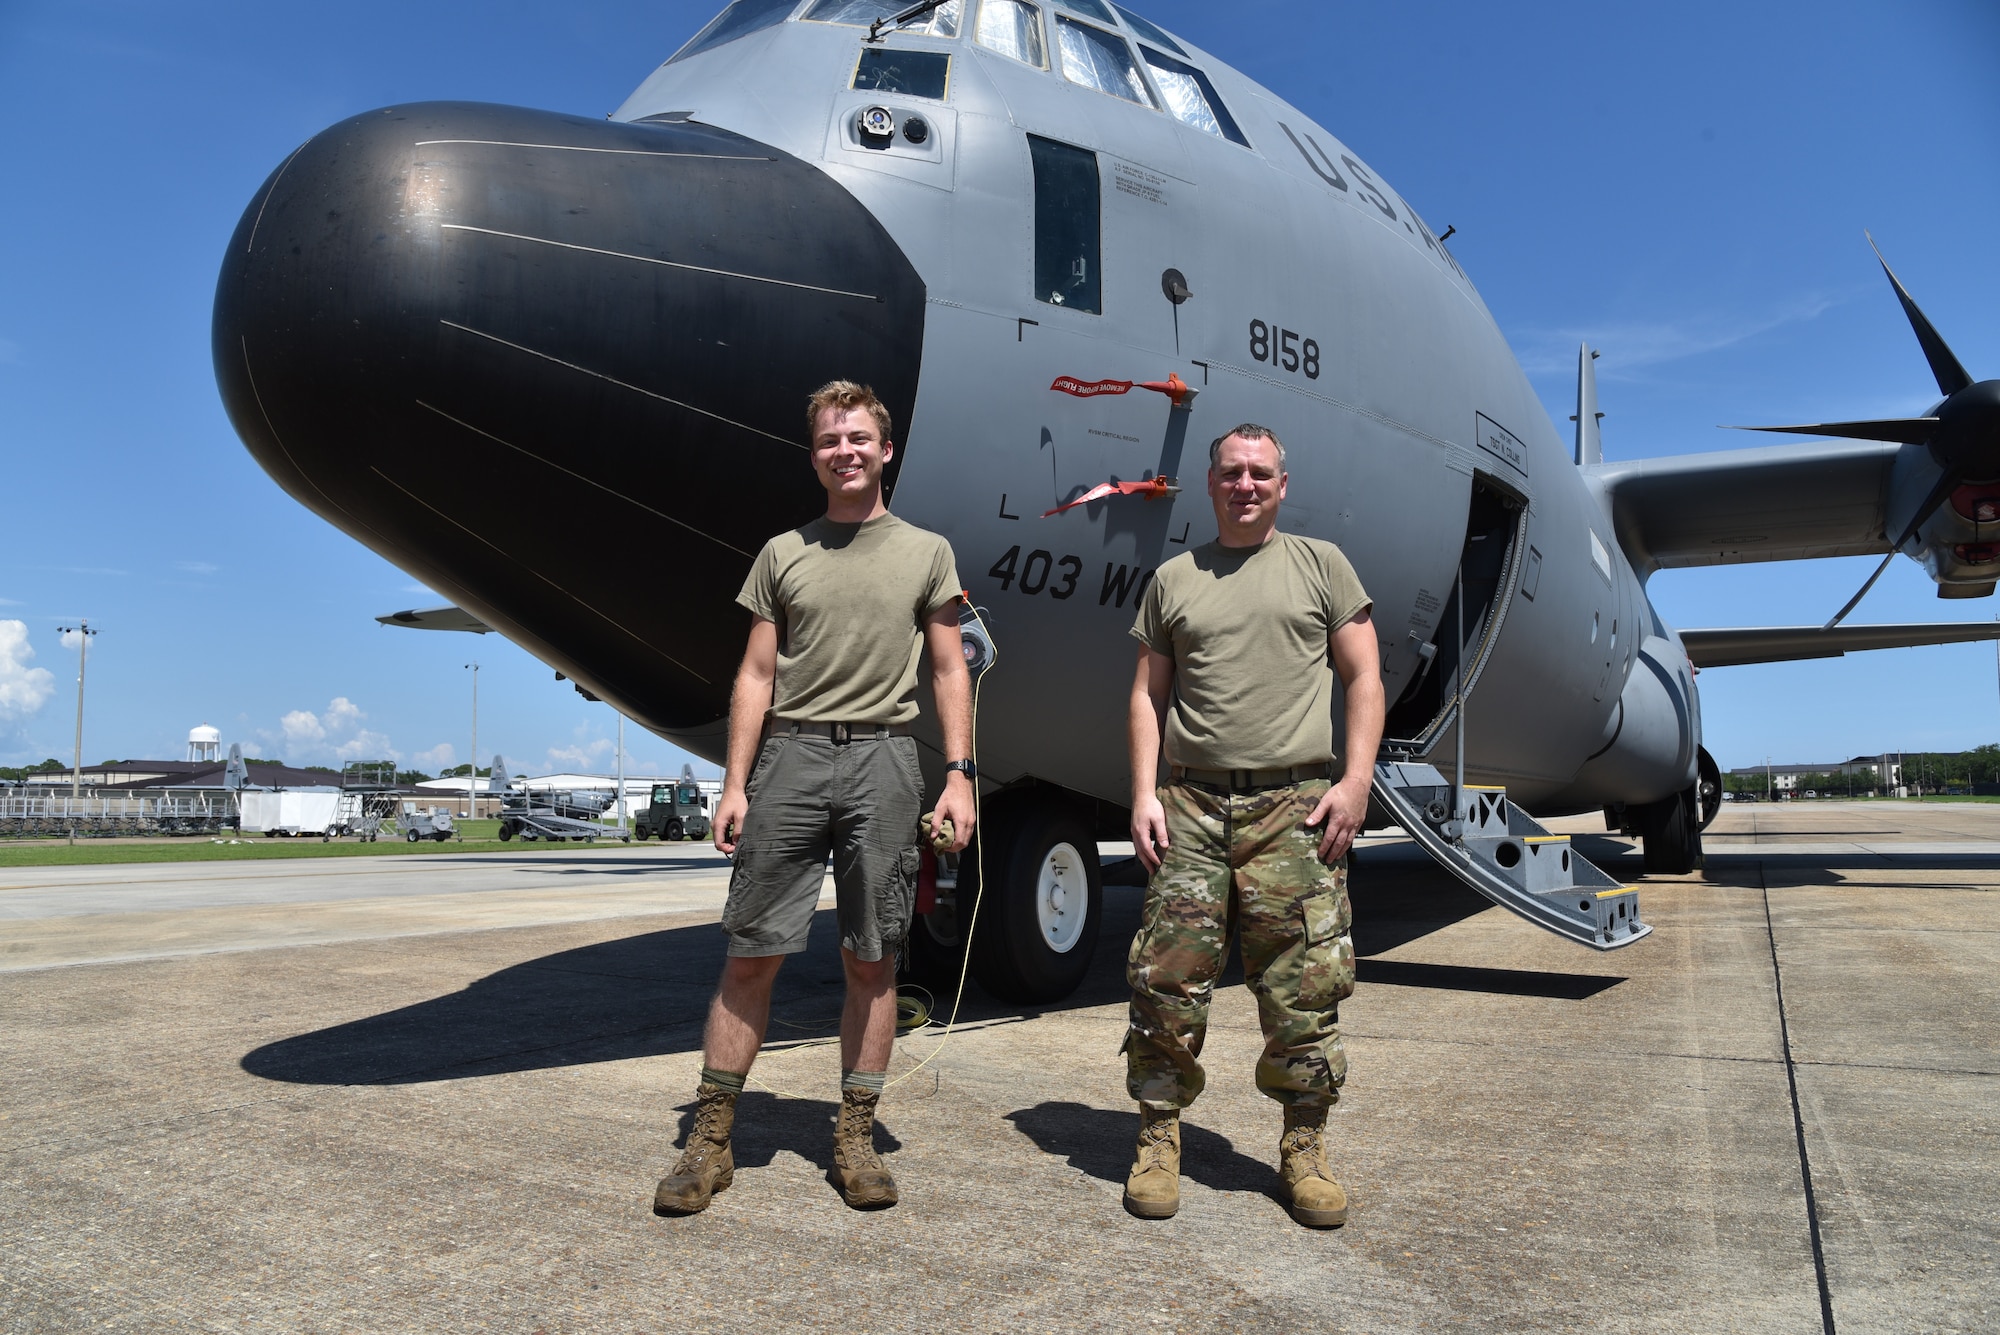 Senior Airman Robert Koltas (left), 403rd Maintenance Squadron propulsion technician, wears the authorized shorts as he stands next to Tech. Sgt. Ben Cox, 403rd MXS propulsion technician (right), in the Operational Camouflage Pattern trousers, July 17, 2020 at Keesler Air Force Base, Mississippi. (U.S. Air Force photo by Tech Sgt. Michael Farrar)